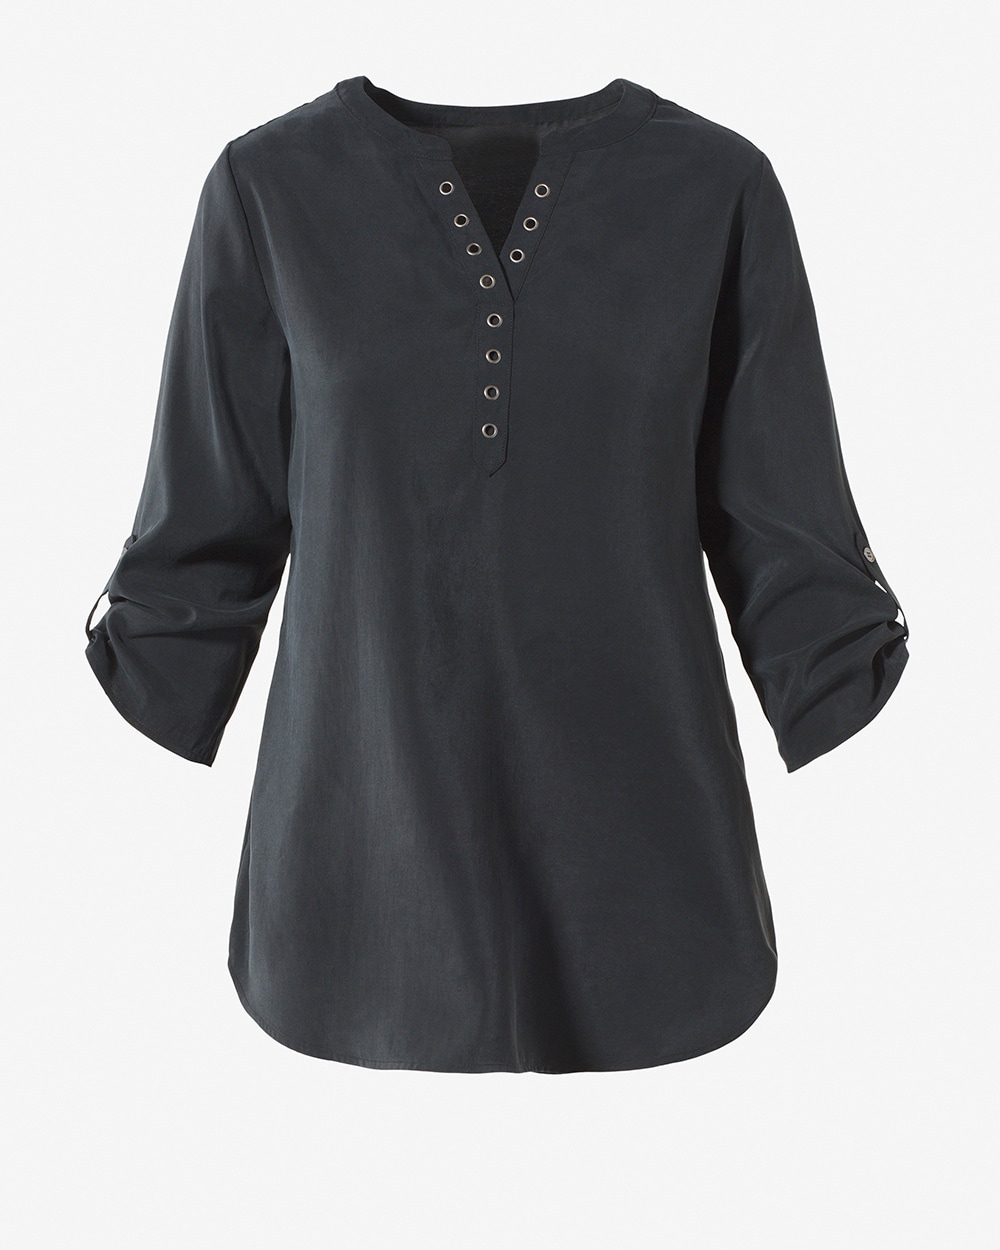 Silky Chic Grommet-Trimmed Tunic